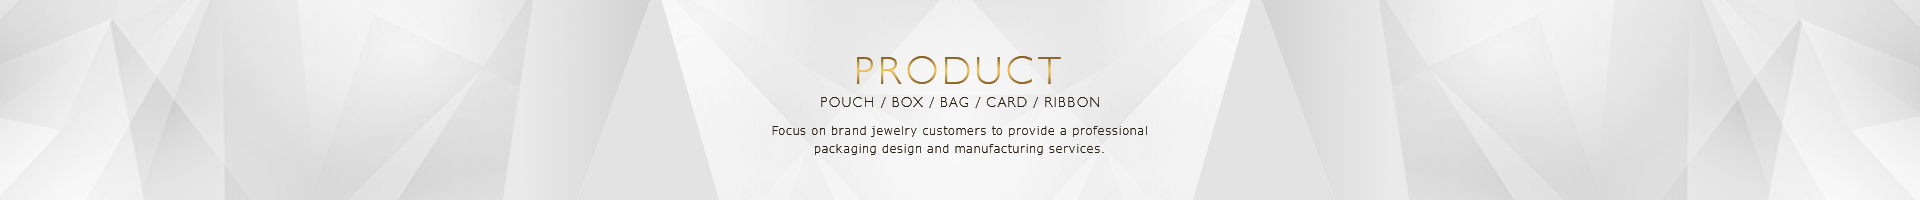 Rich experience jewelry box wholesale, paper jewelry boxes, plastic jewelry box manufacturer